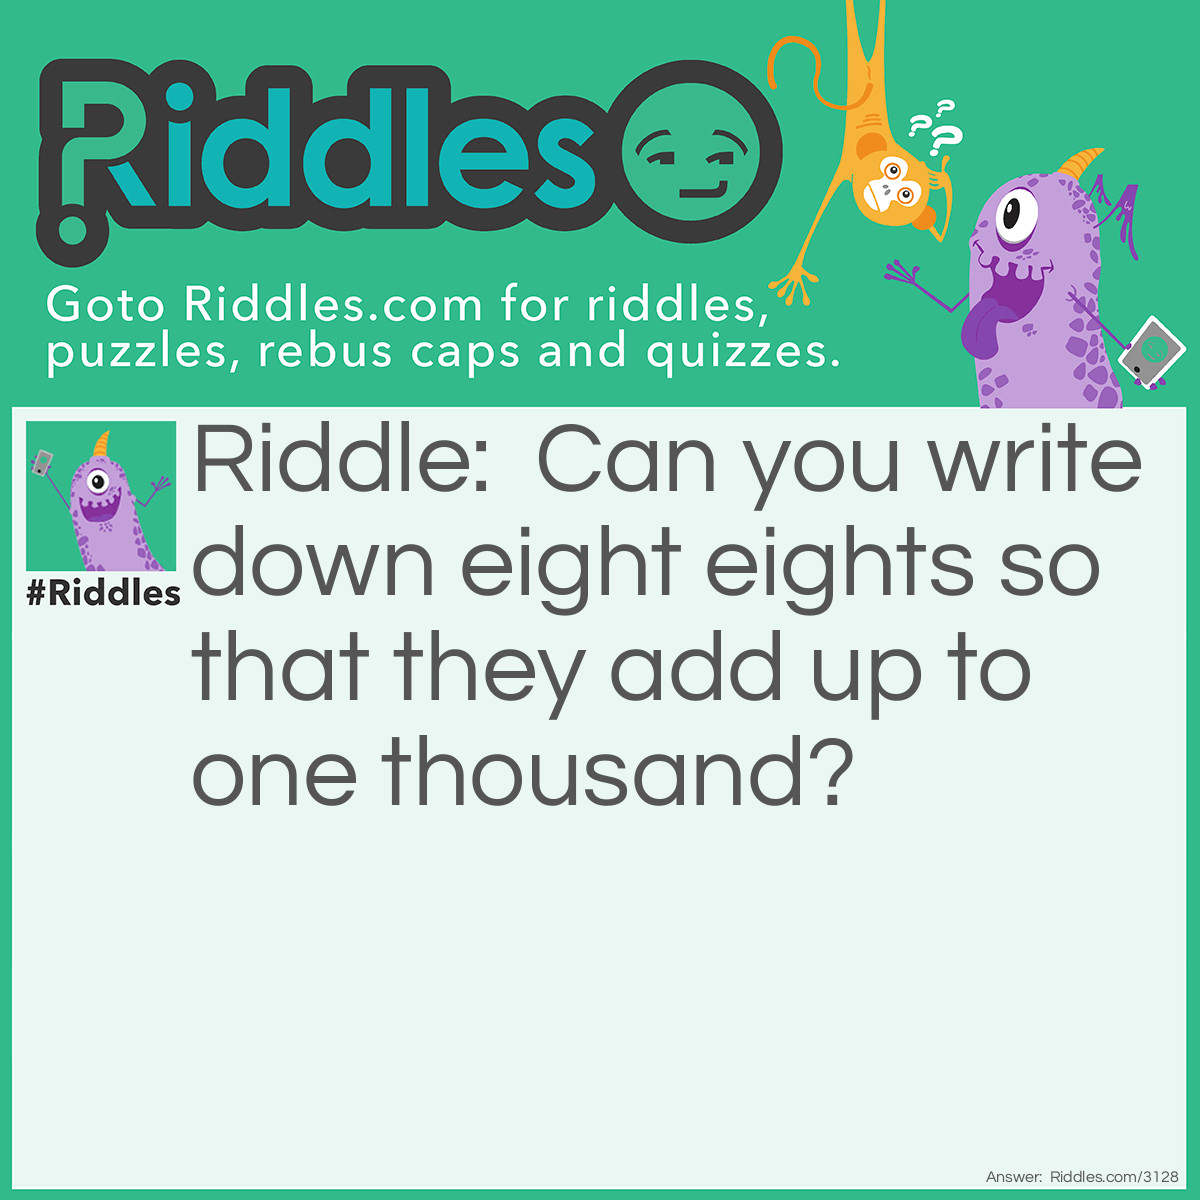 Riddle: Can you write down eight eights so that they add up to one thousand? Answer: 888 + 88 + 8 + 8 + 8 = 1000.